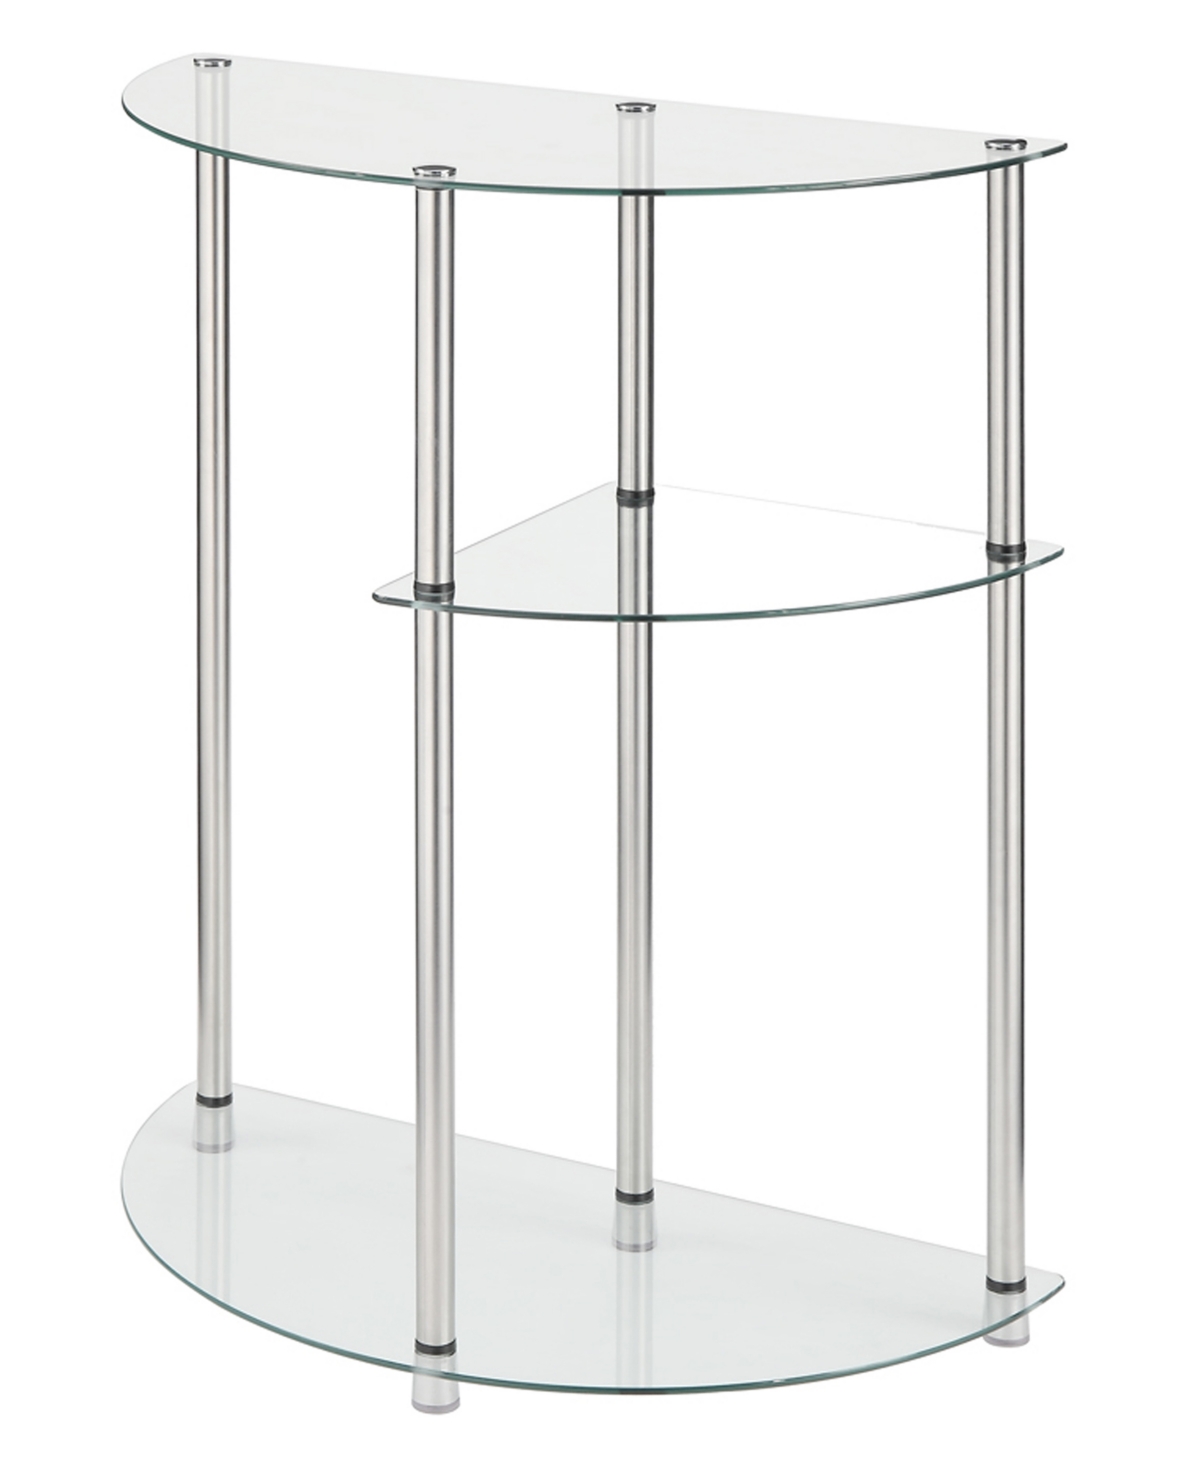 Convenience Concepts Designs2go Classic Glass 3 Tier Display Entryway Hall Table